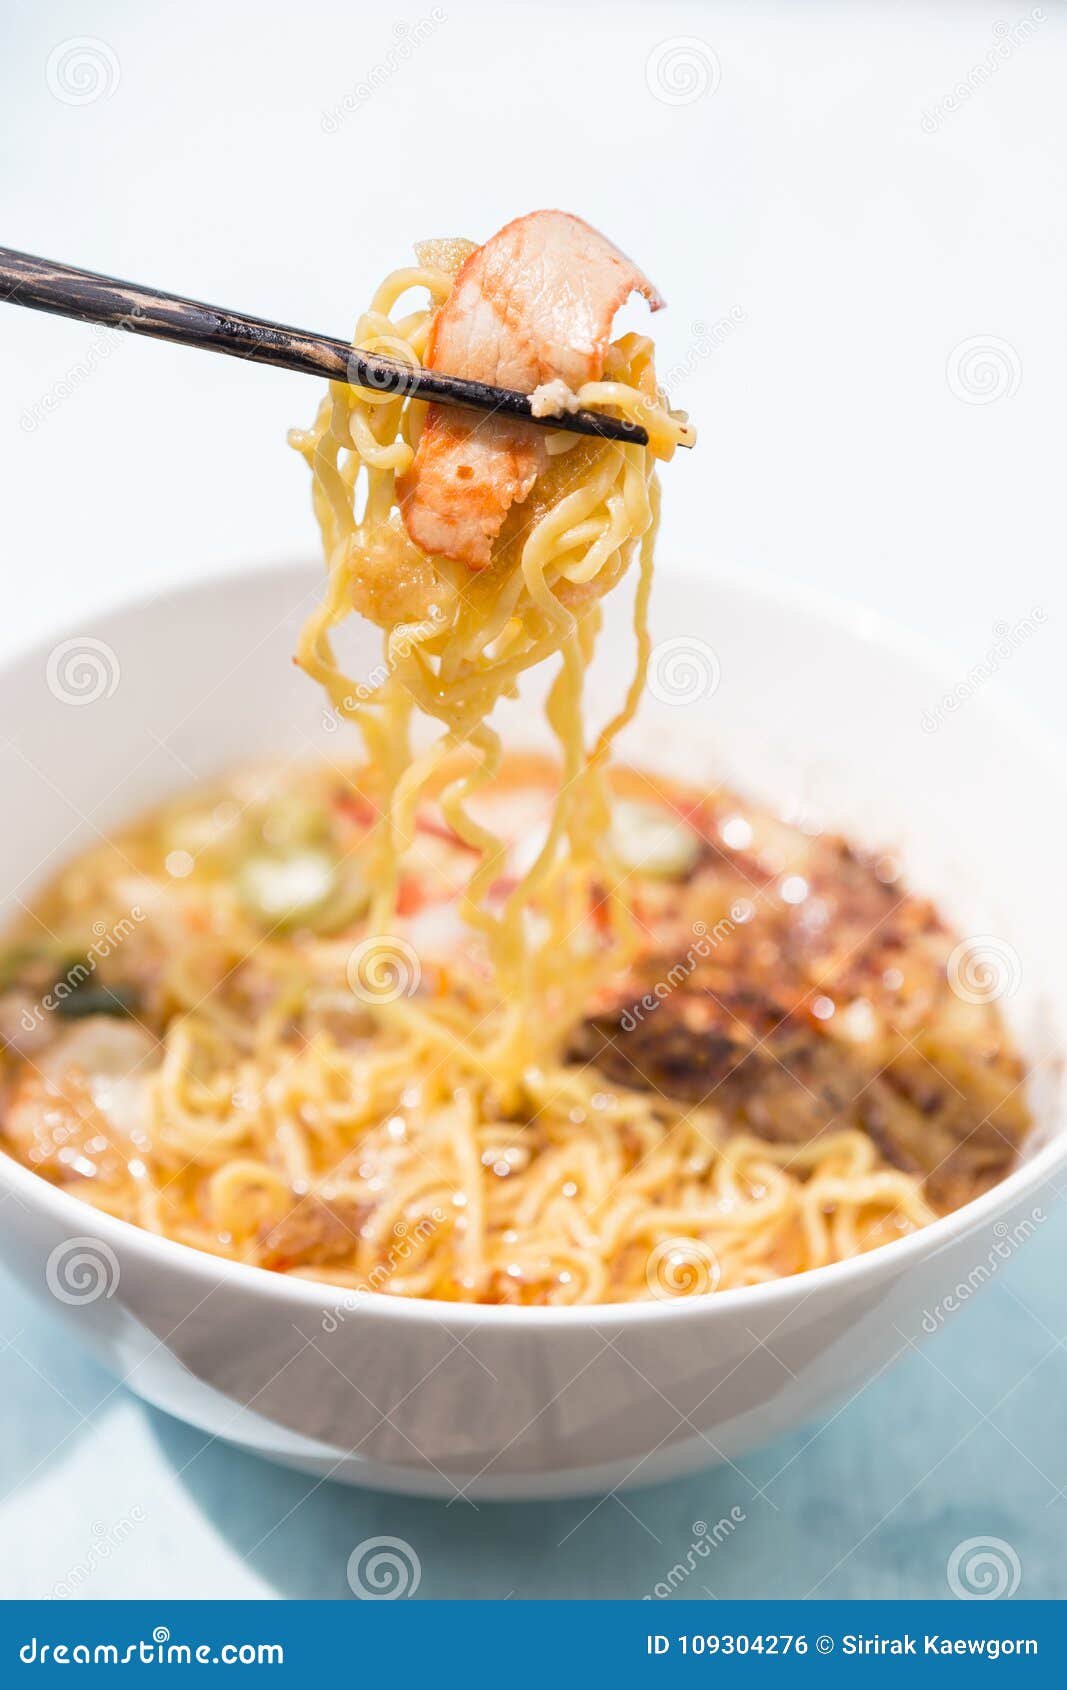 Spicy pork noodle soup stock photo. Image of china, pork - 109304276